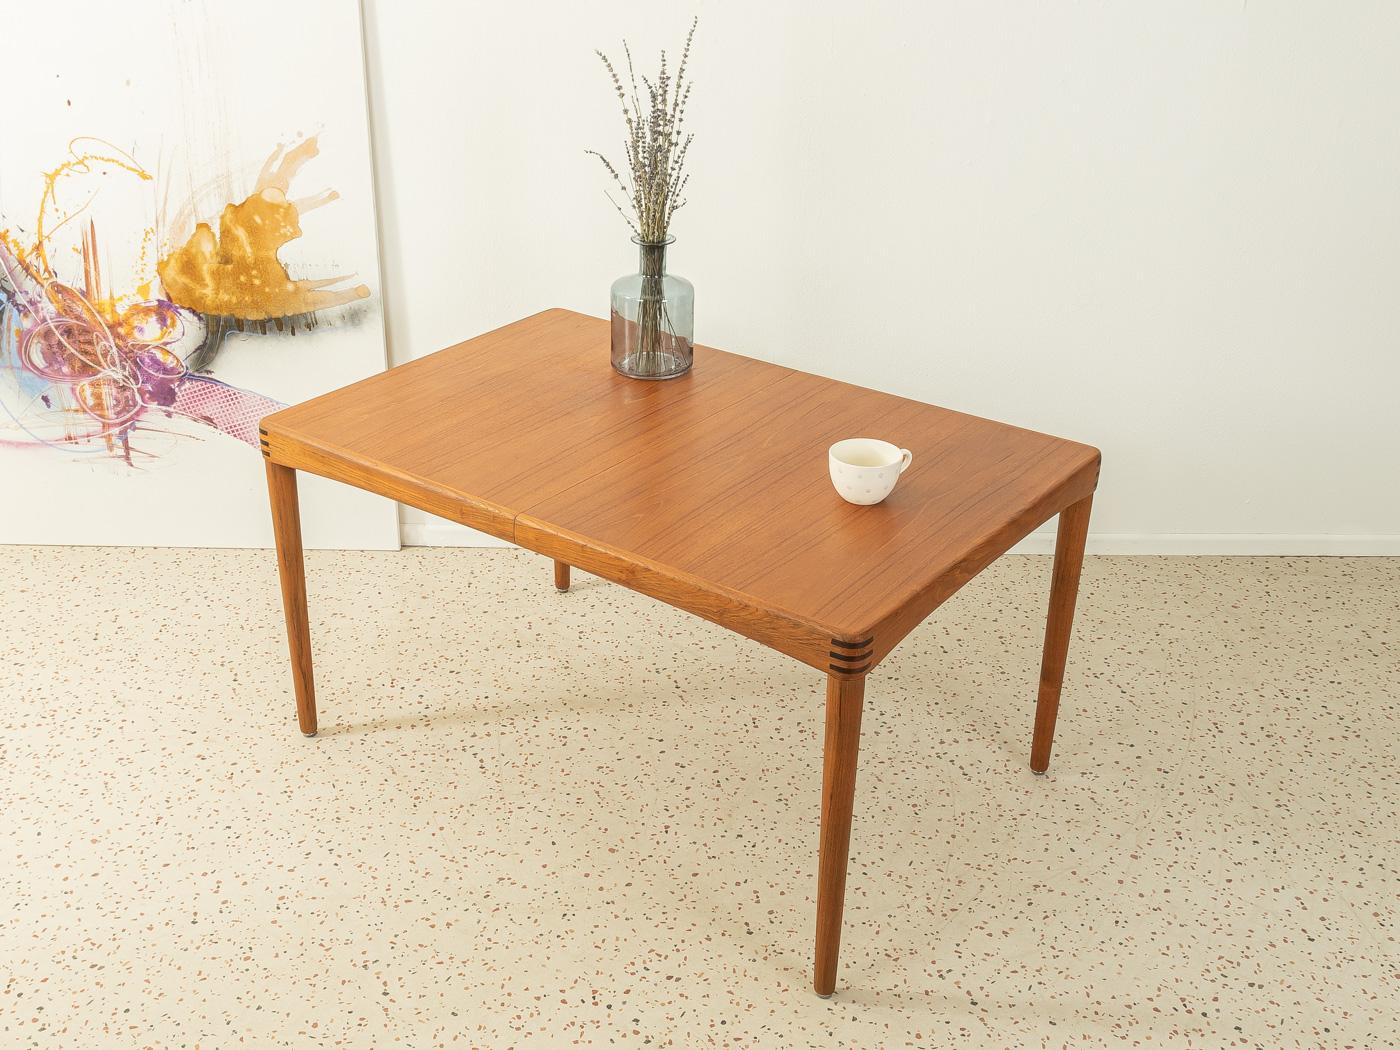 Classic extendable teak dining table from the 1960s by H.W. Klein for Bramin. Solid frame and veneered table top with solid wood edge. The insert plate can be stowed under the table top.

Quality features:
- accomplished design: perfect